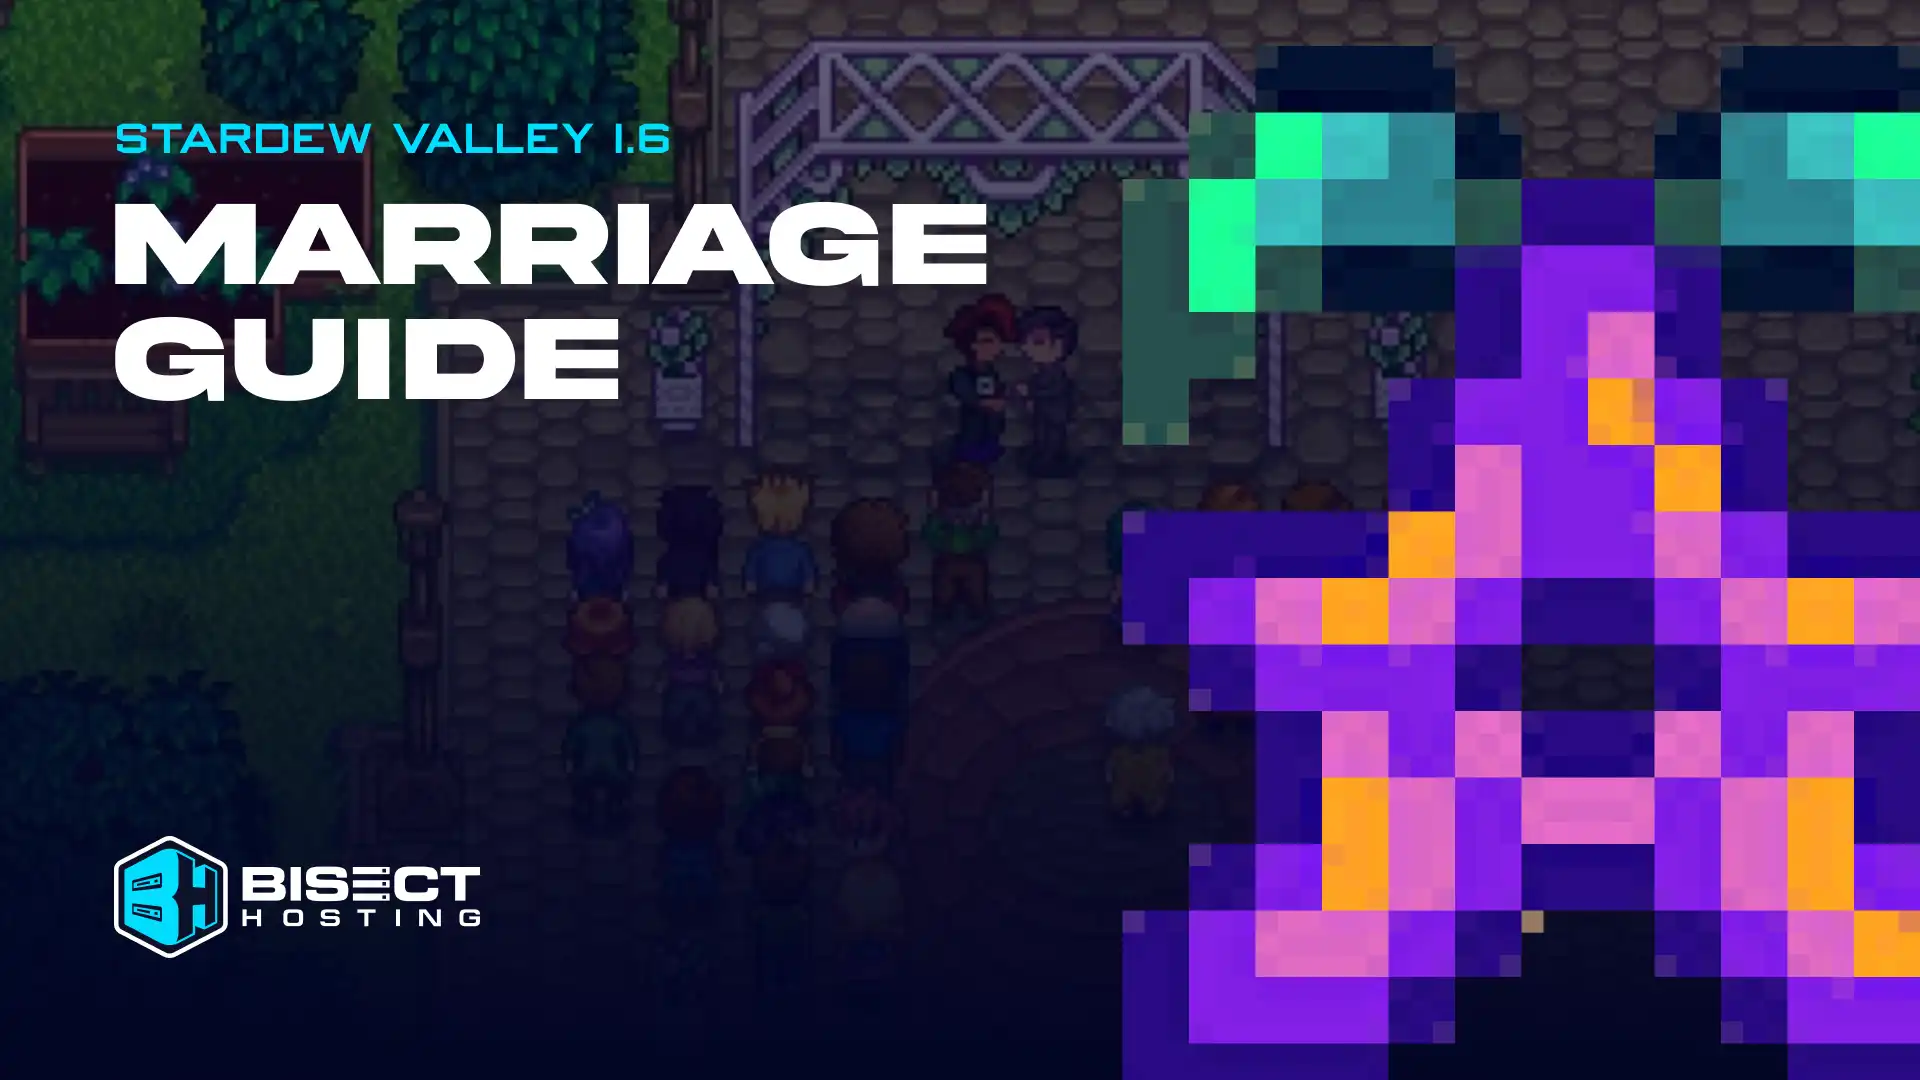 Stardew Valley 1.6 Marriage Guide: How to Get Married, Honeymoon Phase, & More